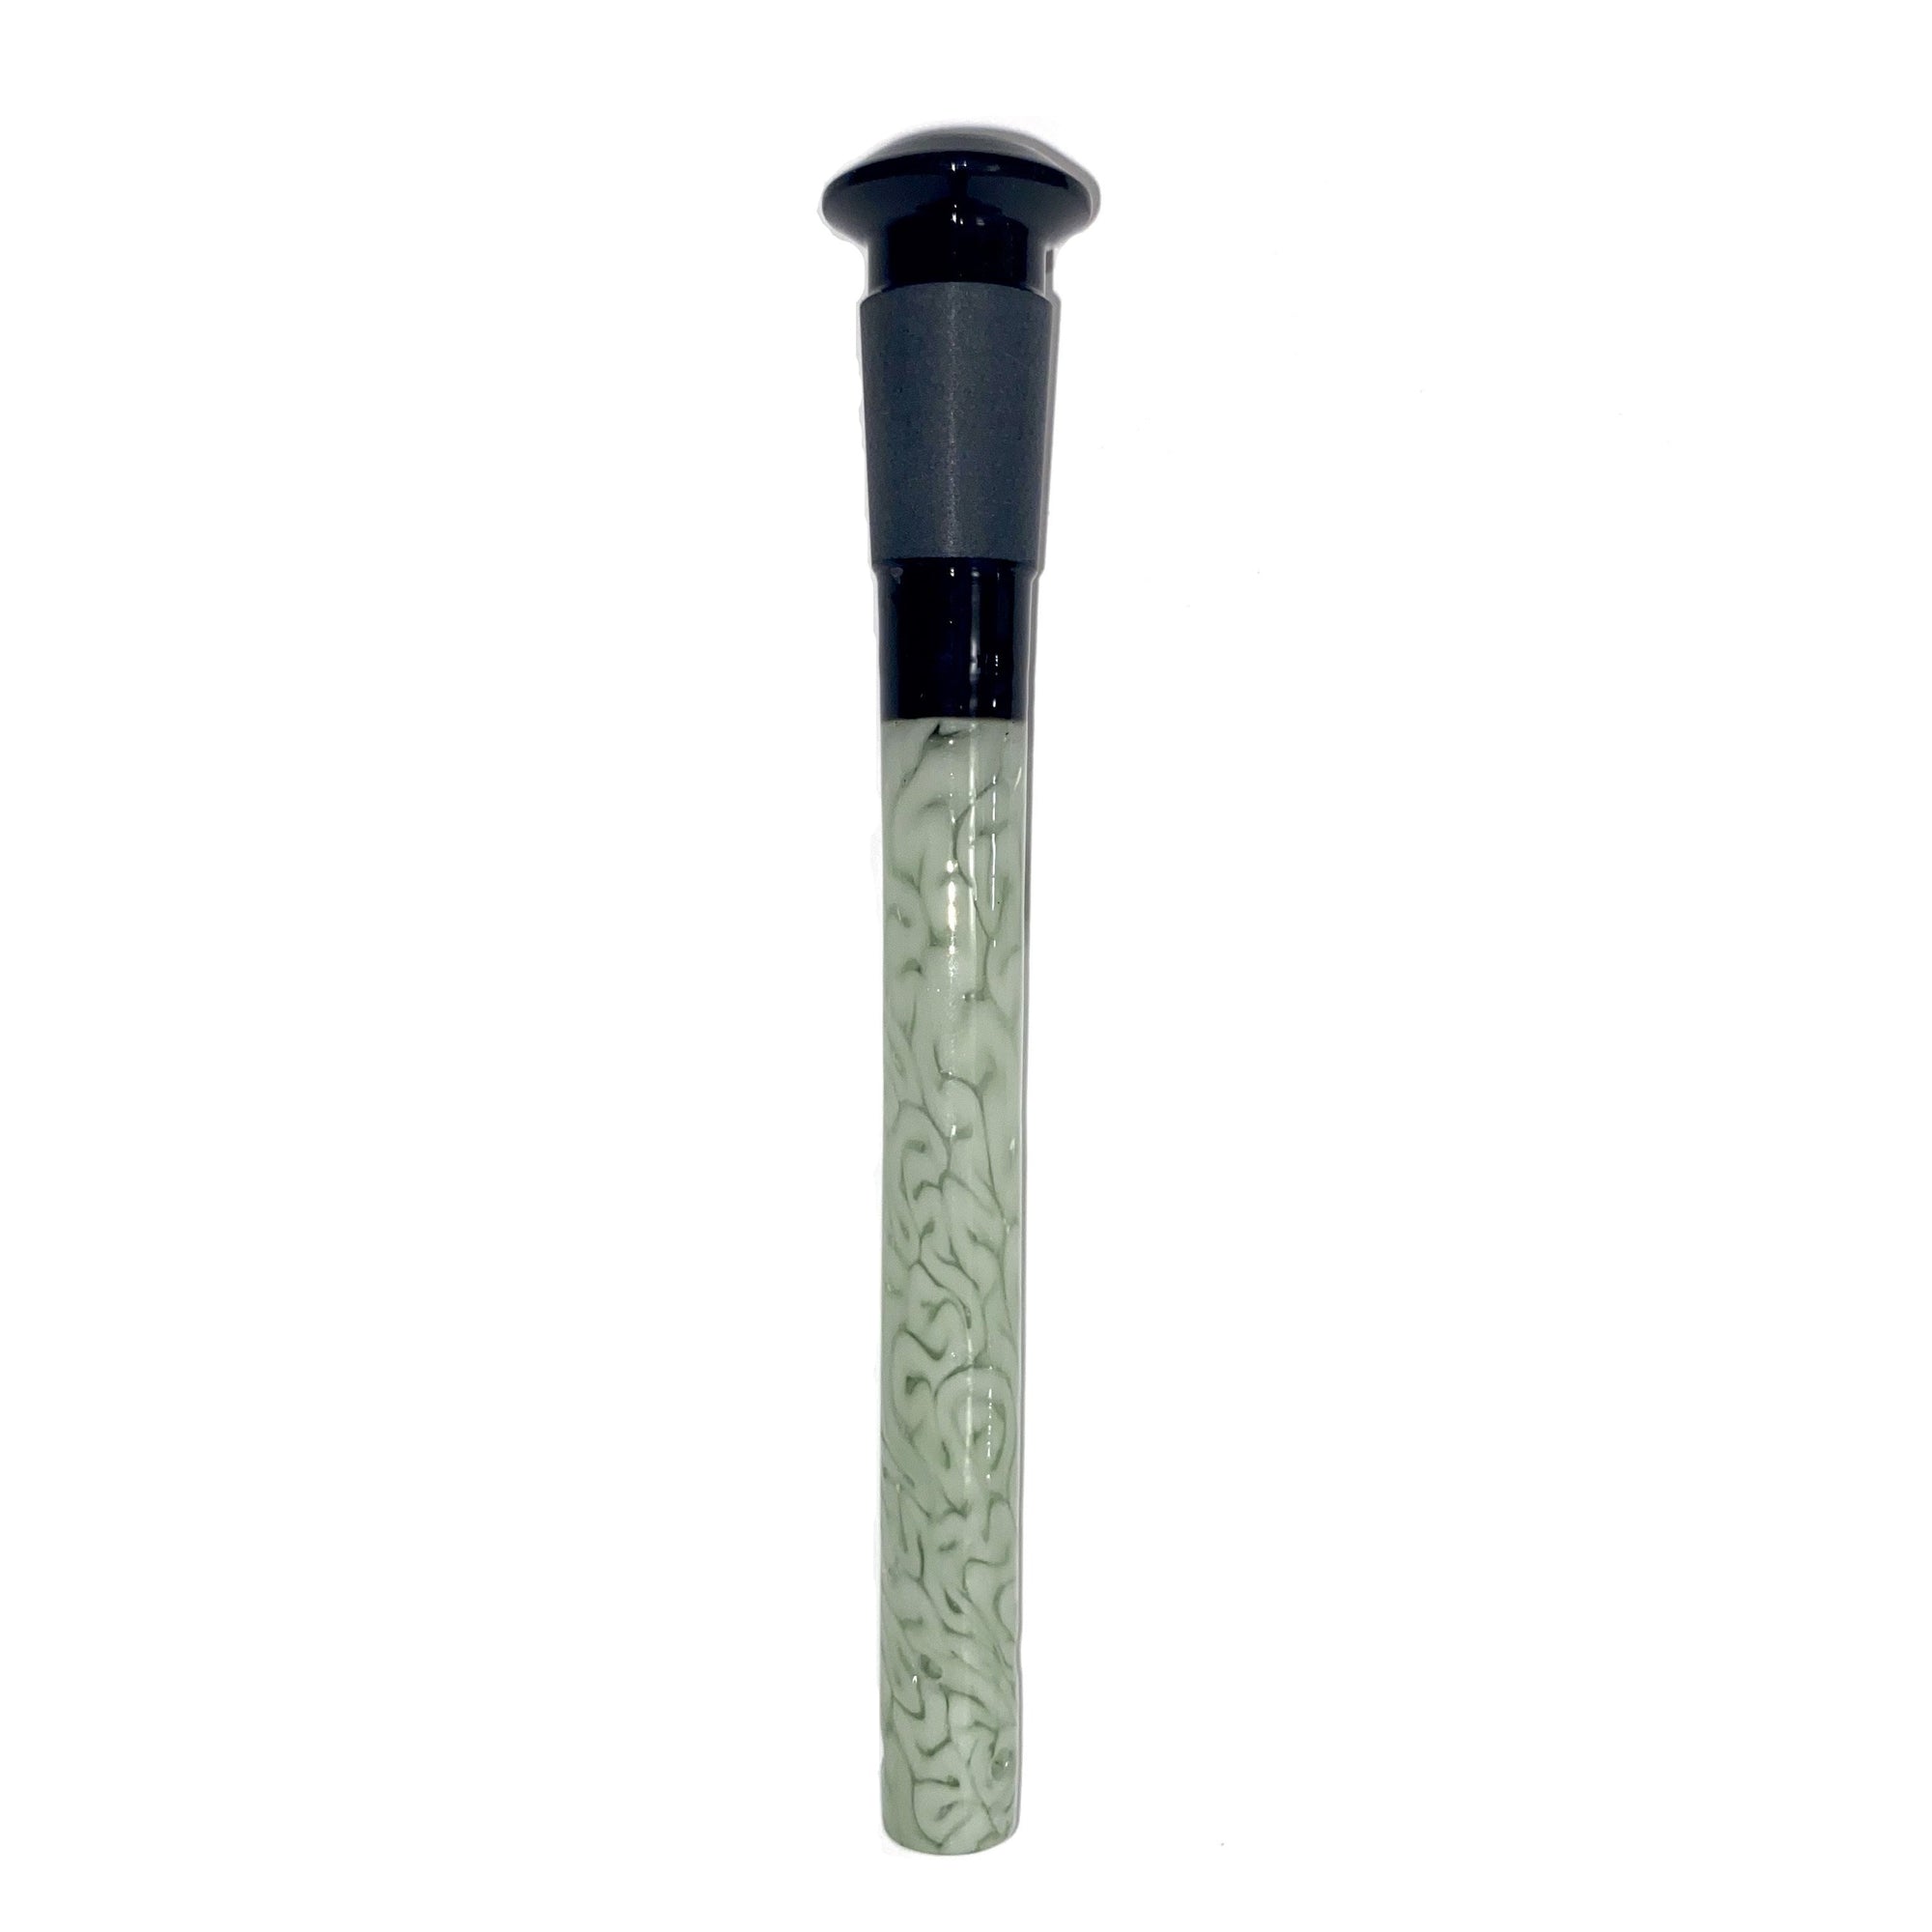 Dustorm 18/14 Brain Tech Downstem (Green with Black Joint) show variants